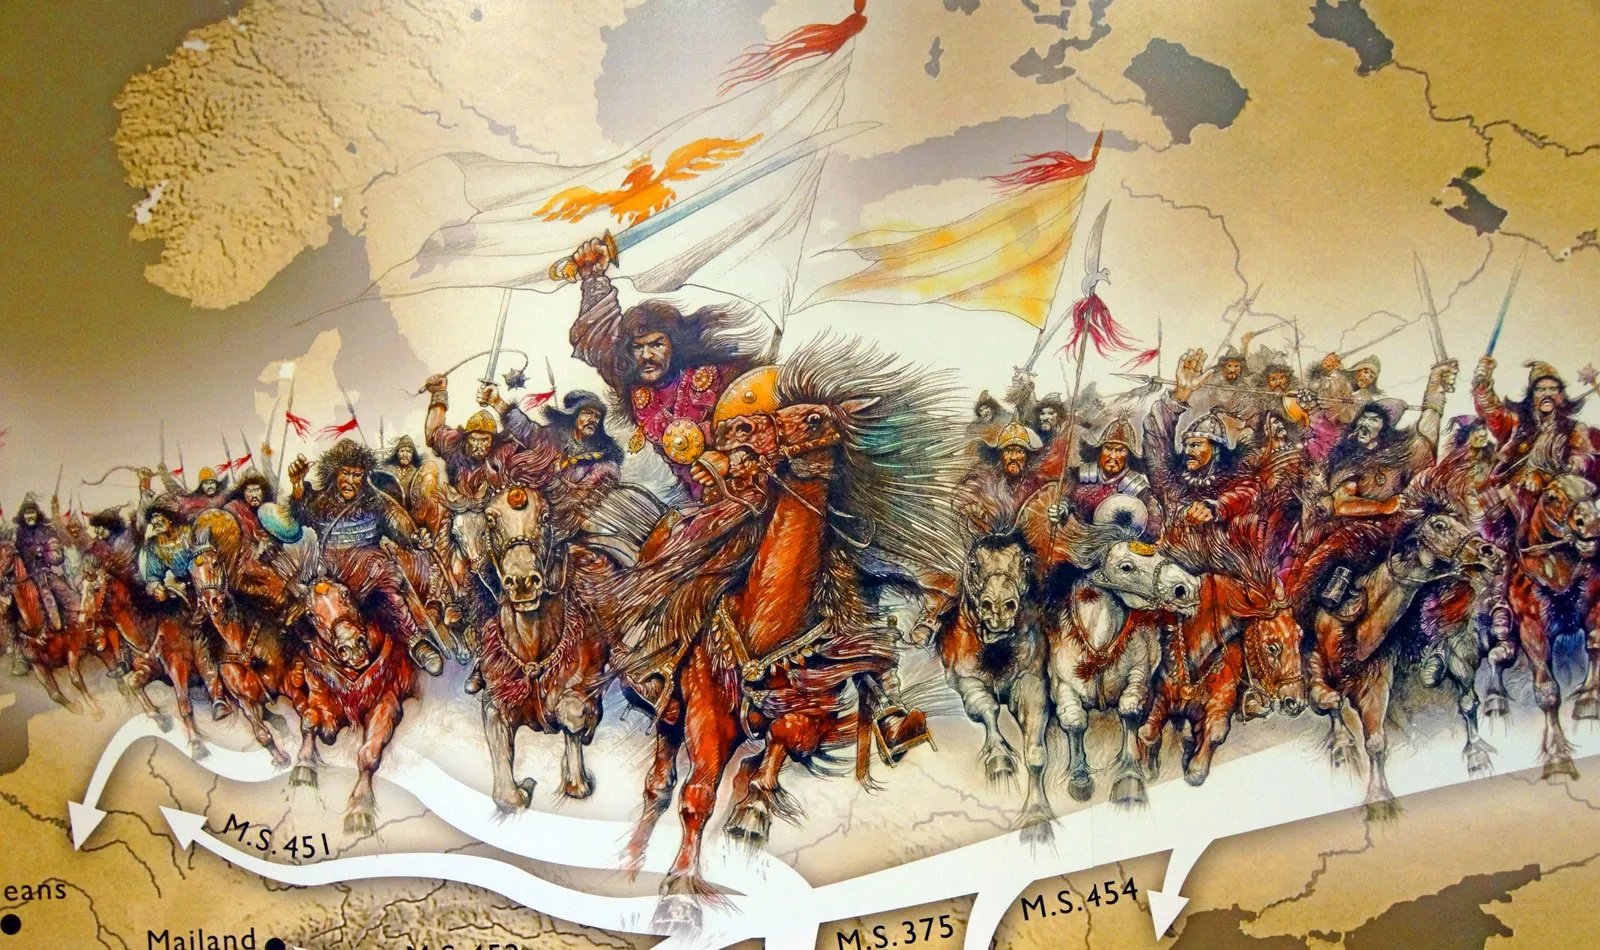 A painting of a group of warriors on horseback, with Attila the Hun in the front, riding across a map of Europe and Asia, with labels for different locations and dates.